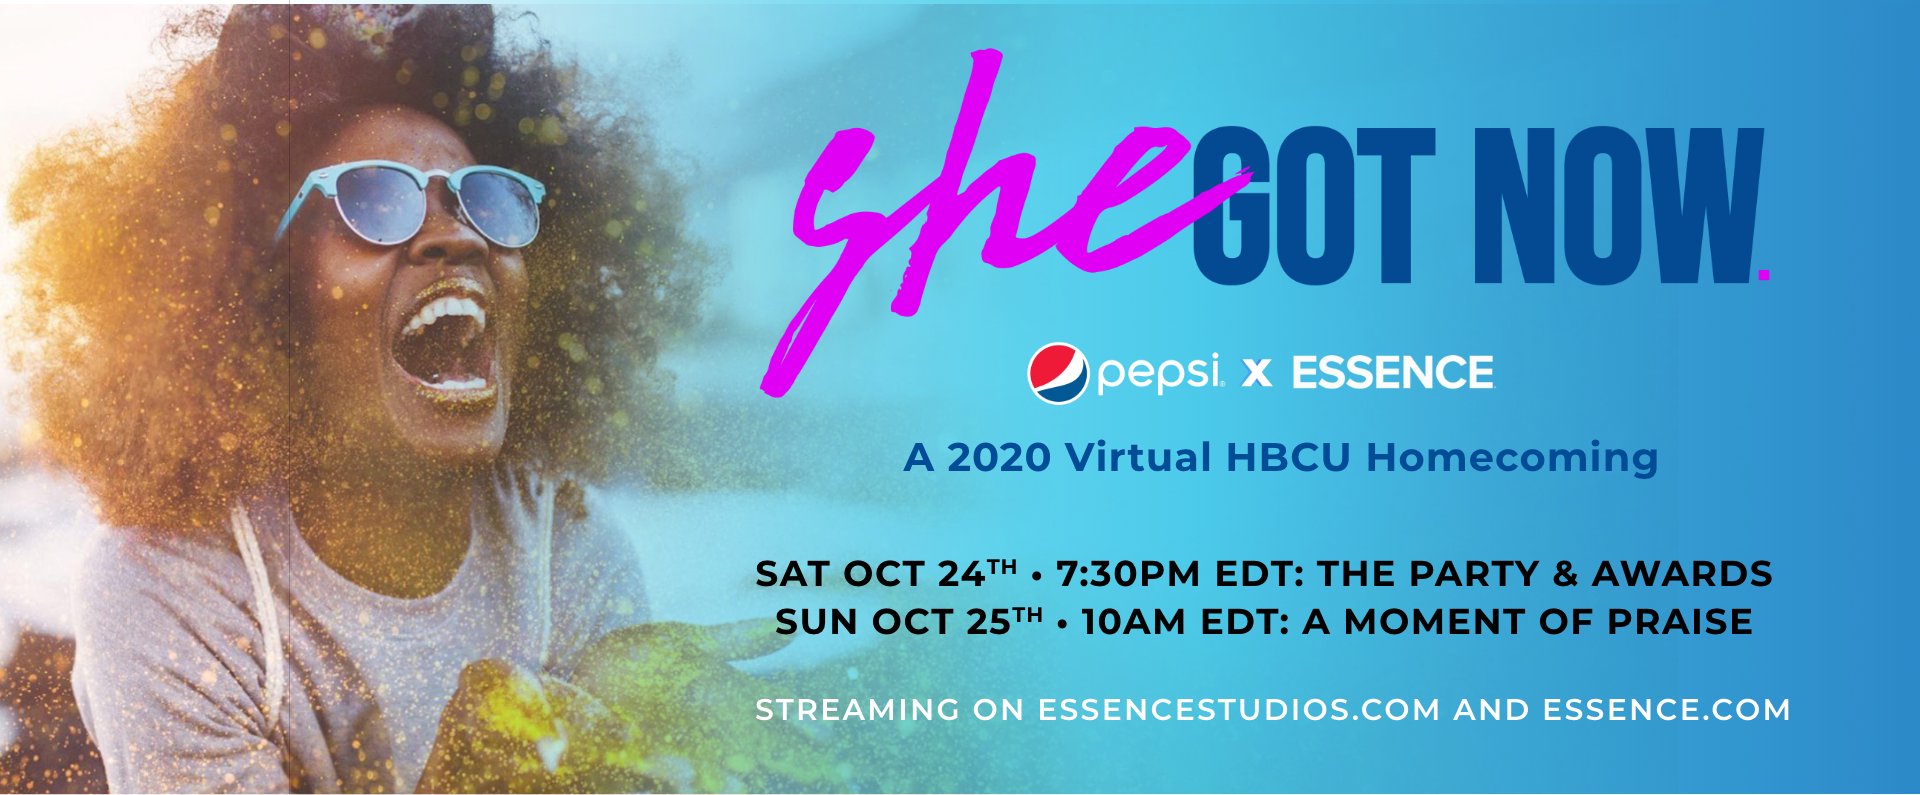 ESSENCE Is Teaming Up With Pepsi To Bring You The Ultimate Virtual HBCU Homecoming Season Celebration